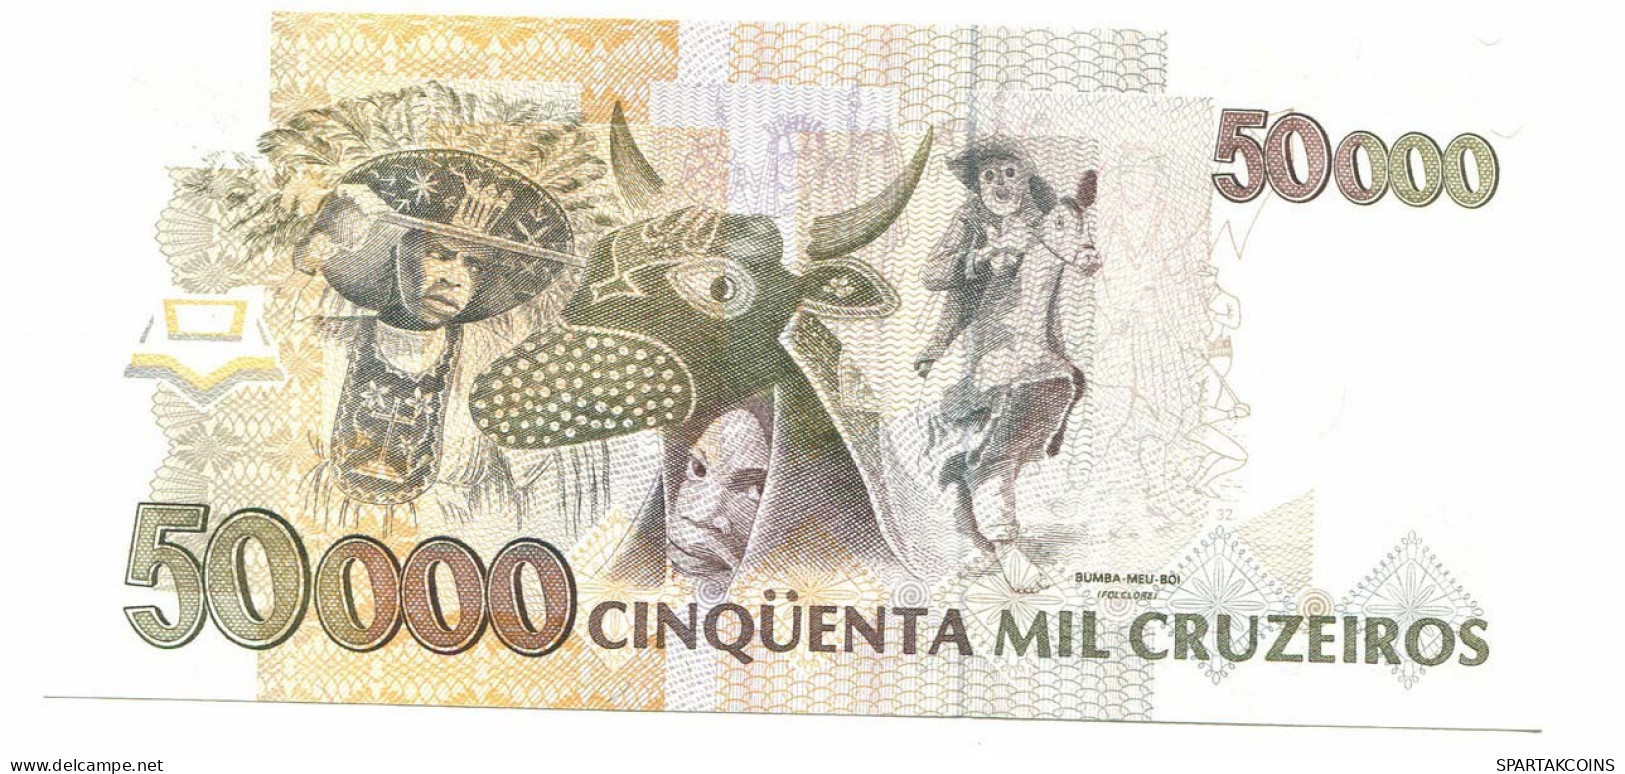 BRASIL 50000 CRUZEIROS 1993 UNC Paper Money Banknote #P10888.4 - [11] Local Banknote Issues